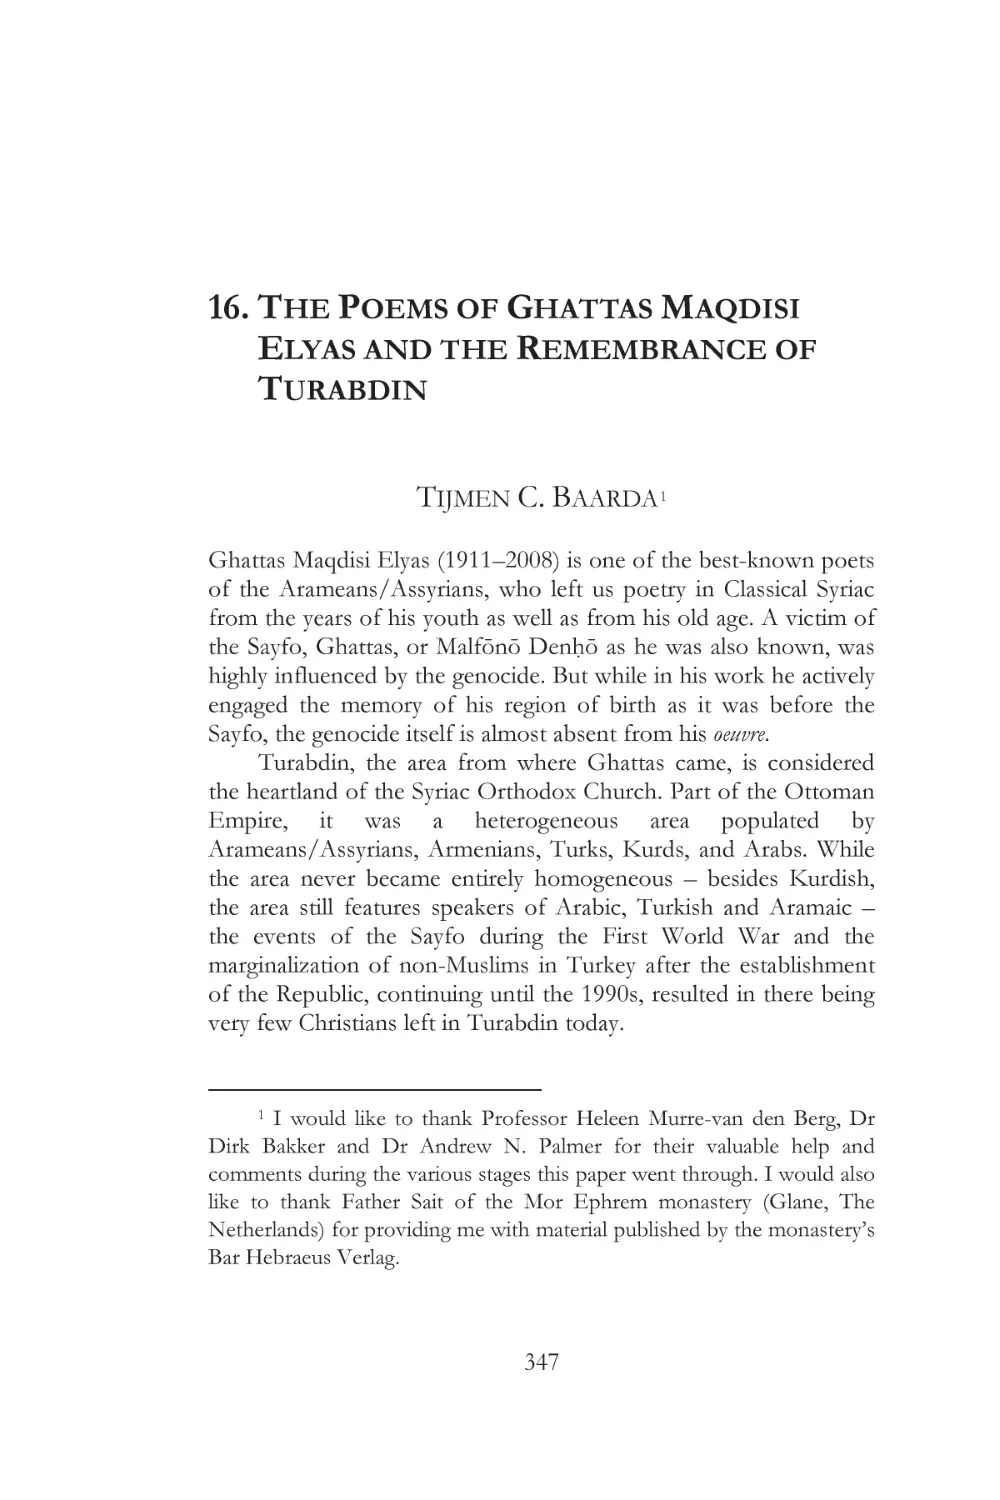 16. THE POEMS OF GHATTAS MAQDISI ELYAS AND THE REMEMBRANCE OF TURABDIN